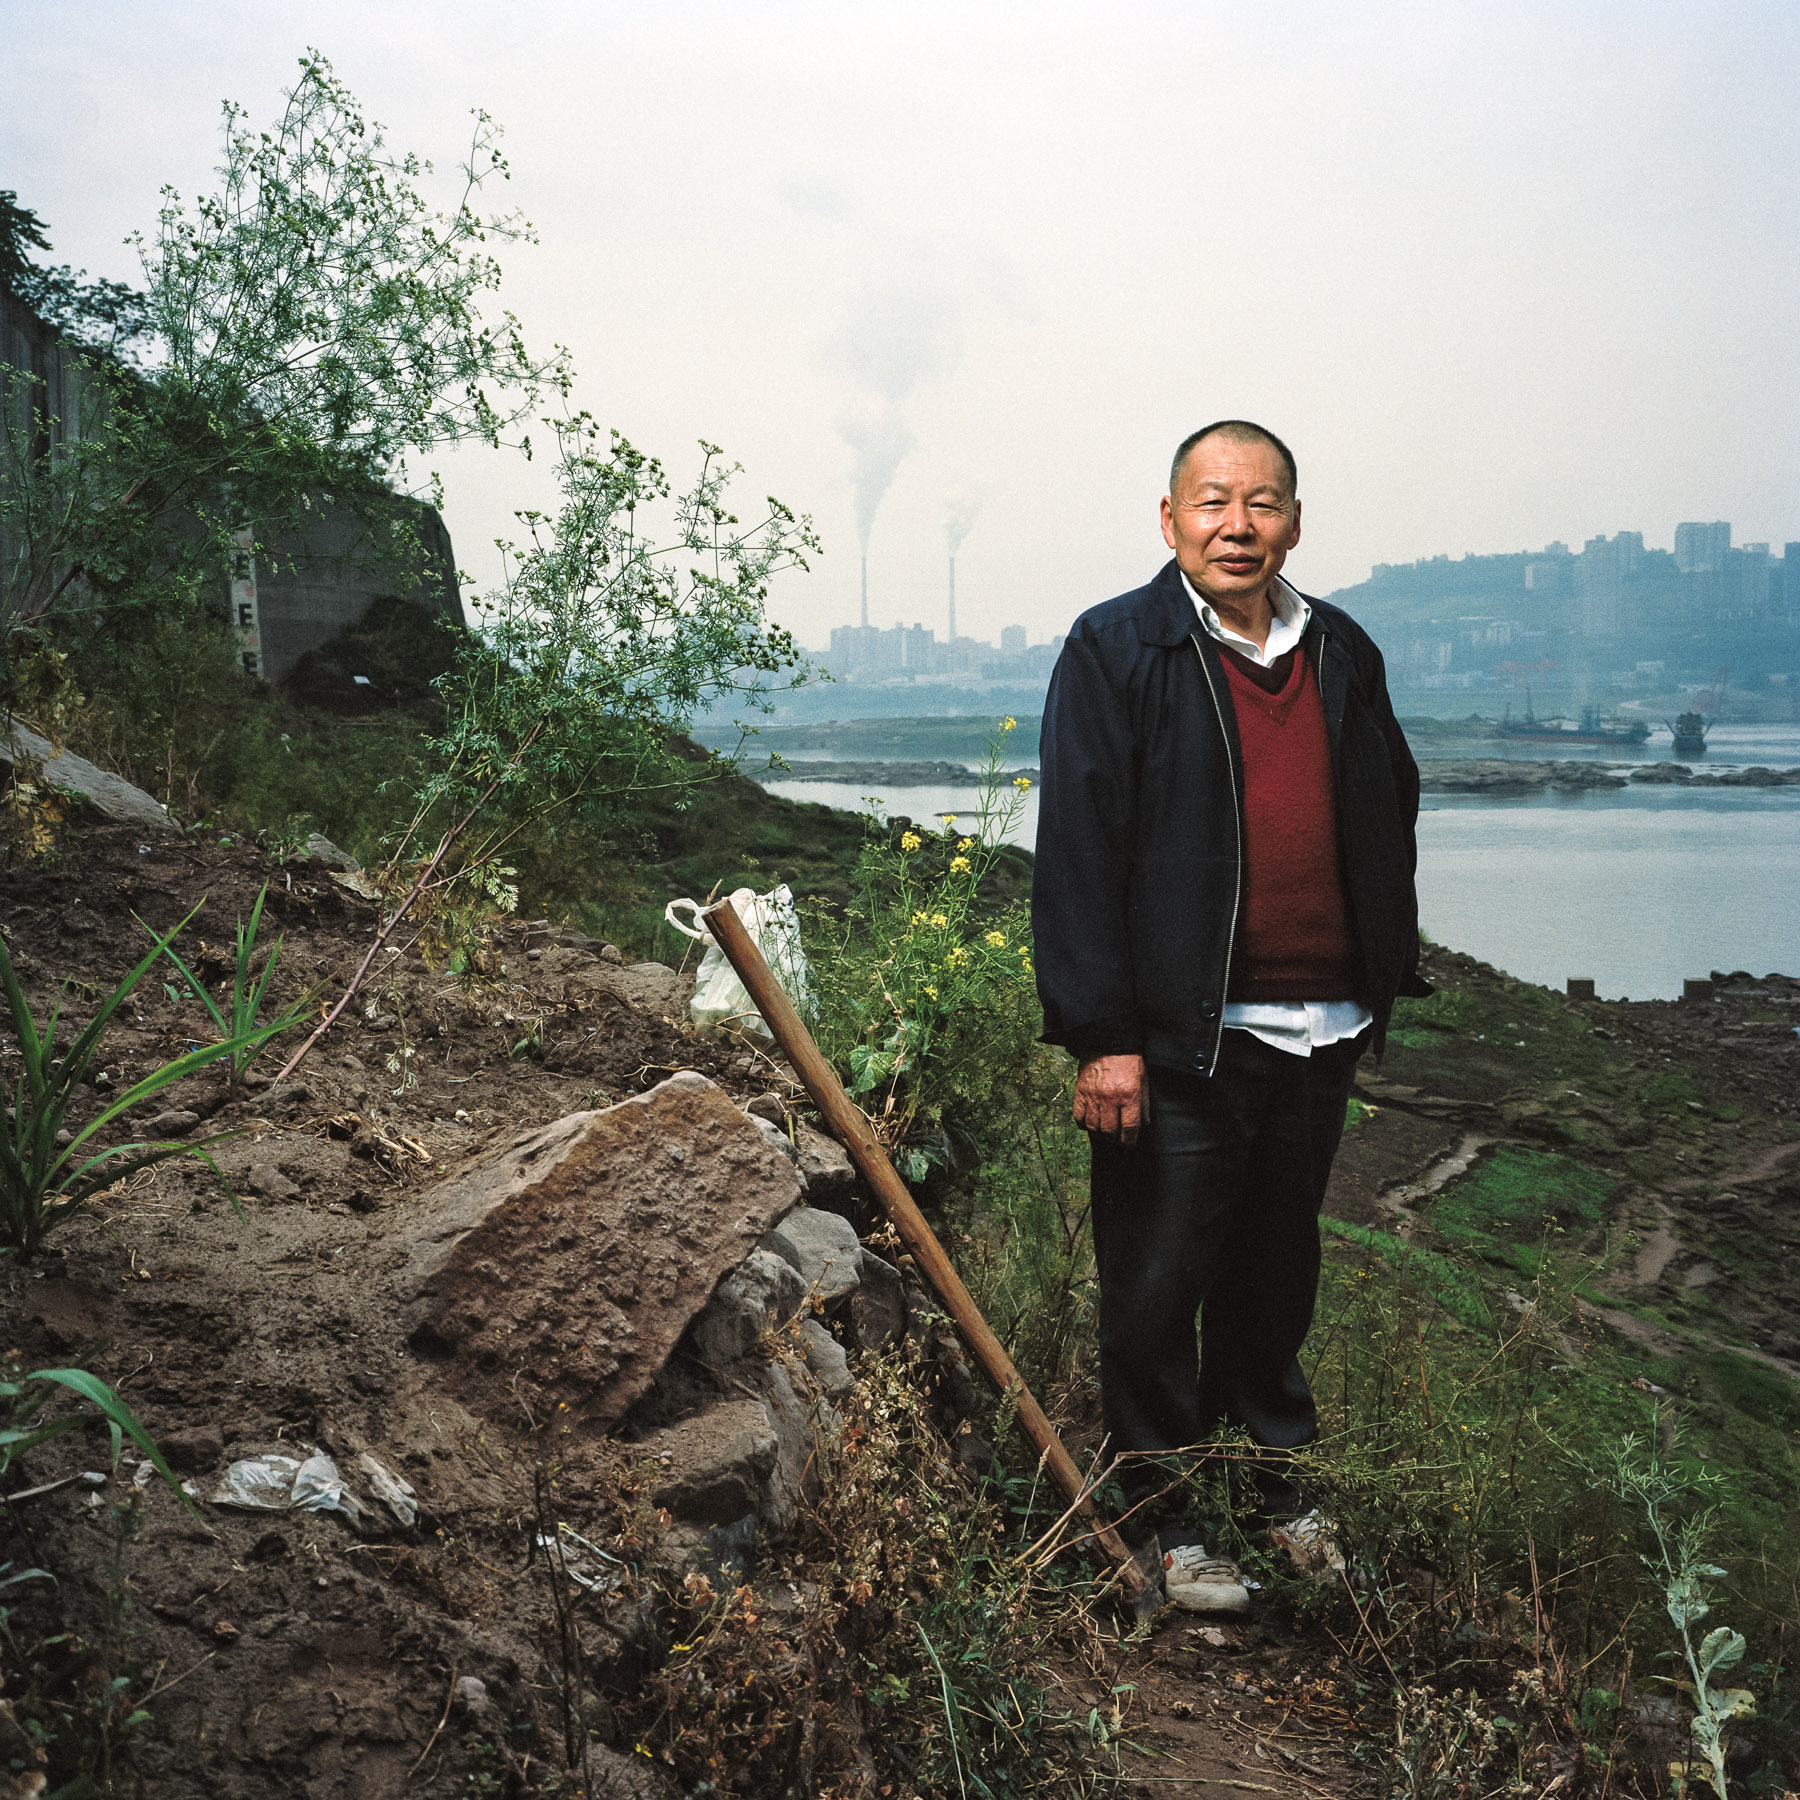  Chongqing, China. 2013. Retired chinese man posing on his small piece of cultivated land under a bridge near the Jialing river in downtown Chongqing.
Chongqing is a major city in the Southwest of China and one of the five national central cities in 